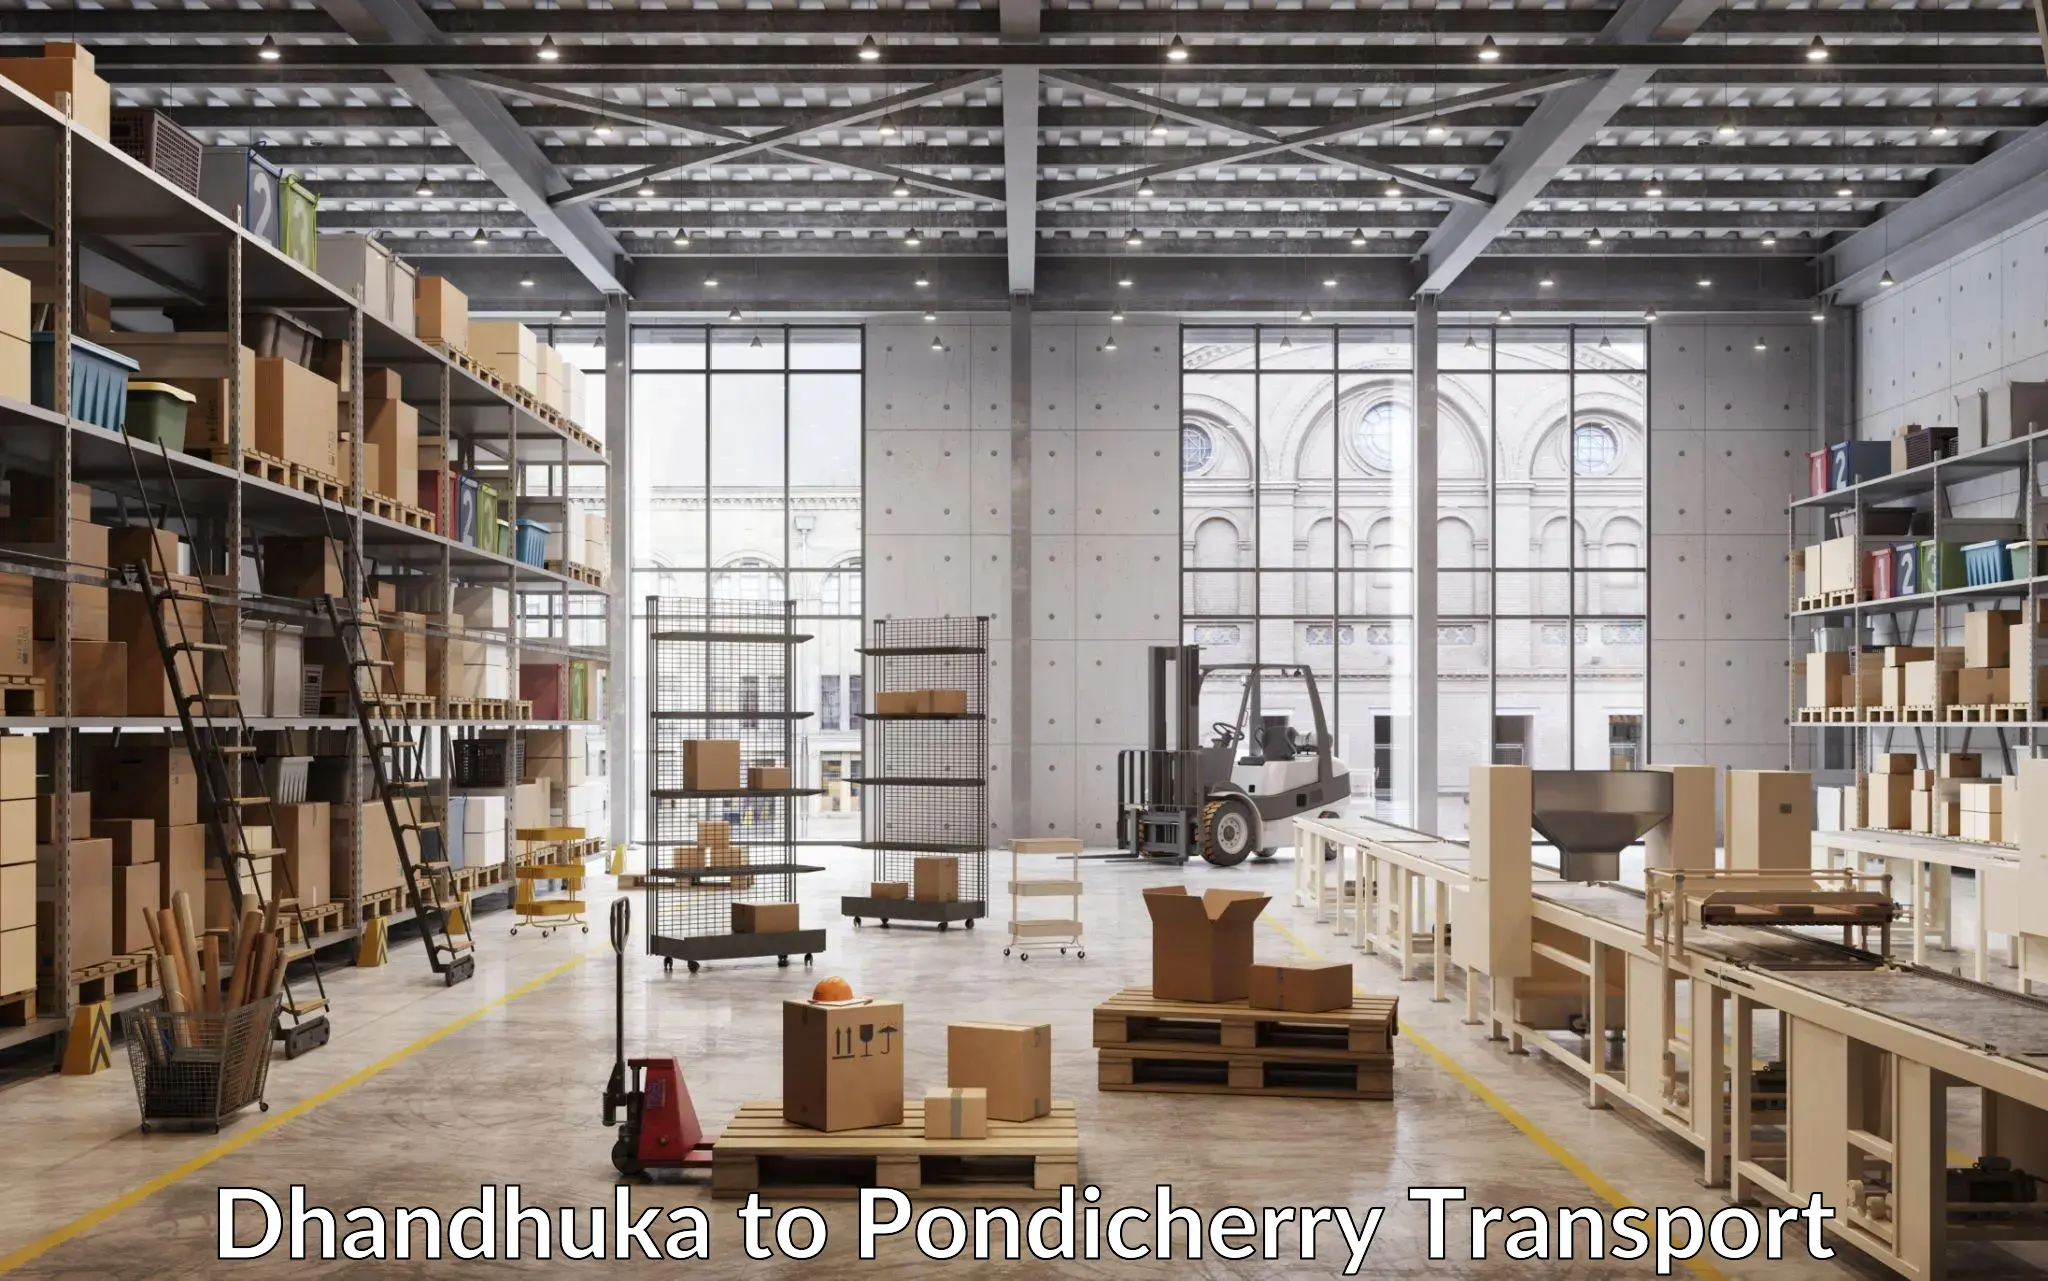 Goods delivery service Dhandhuka to Pondicherry